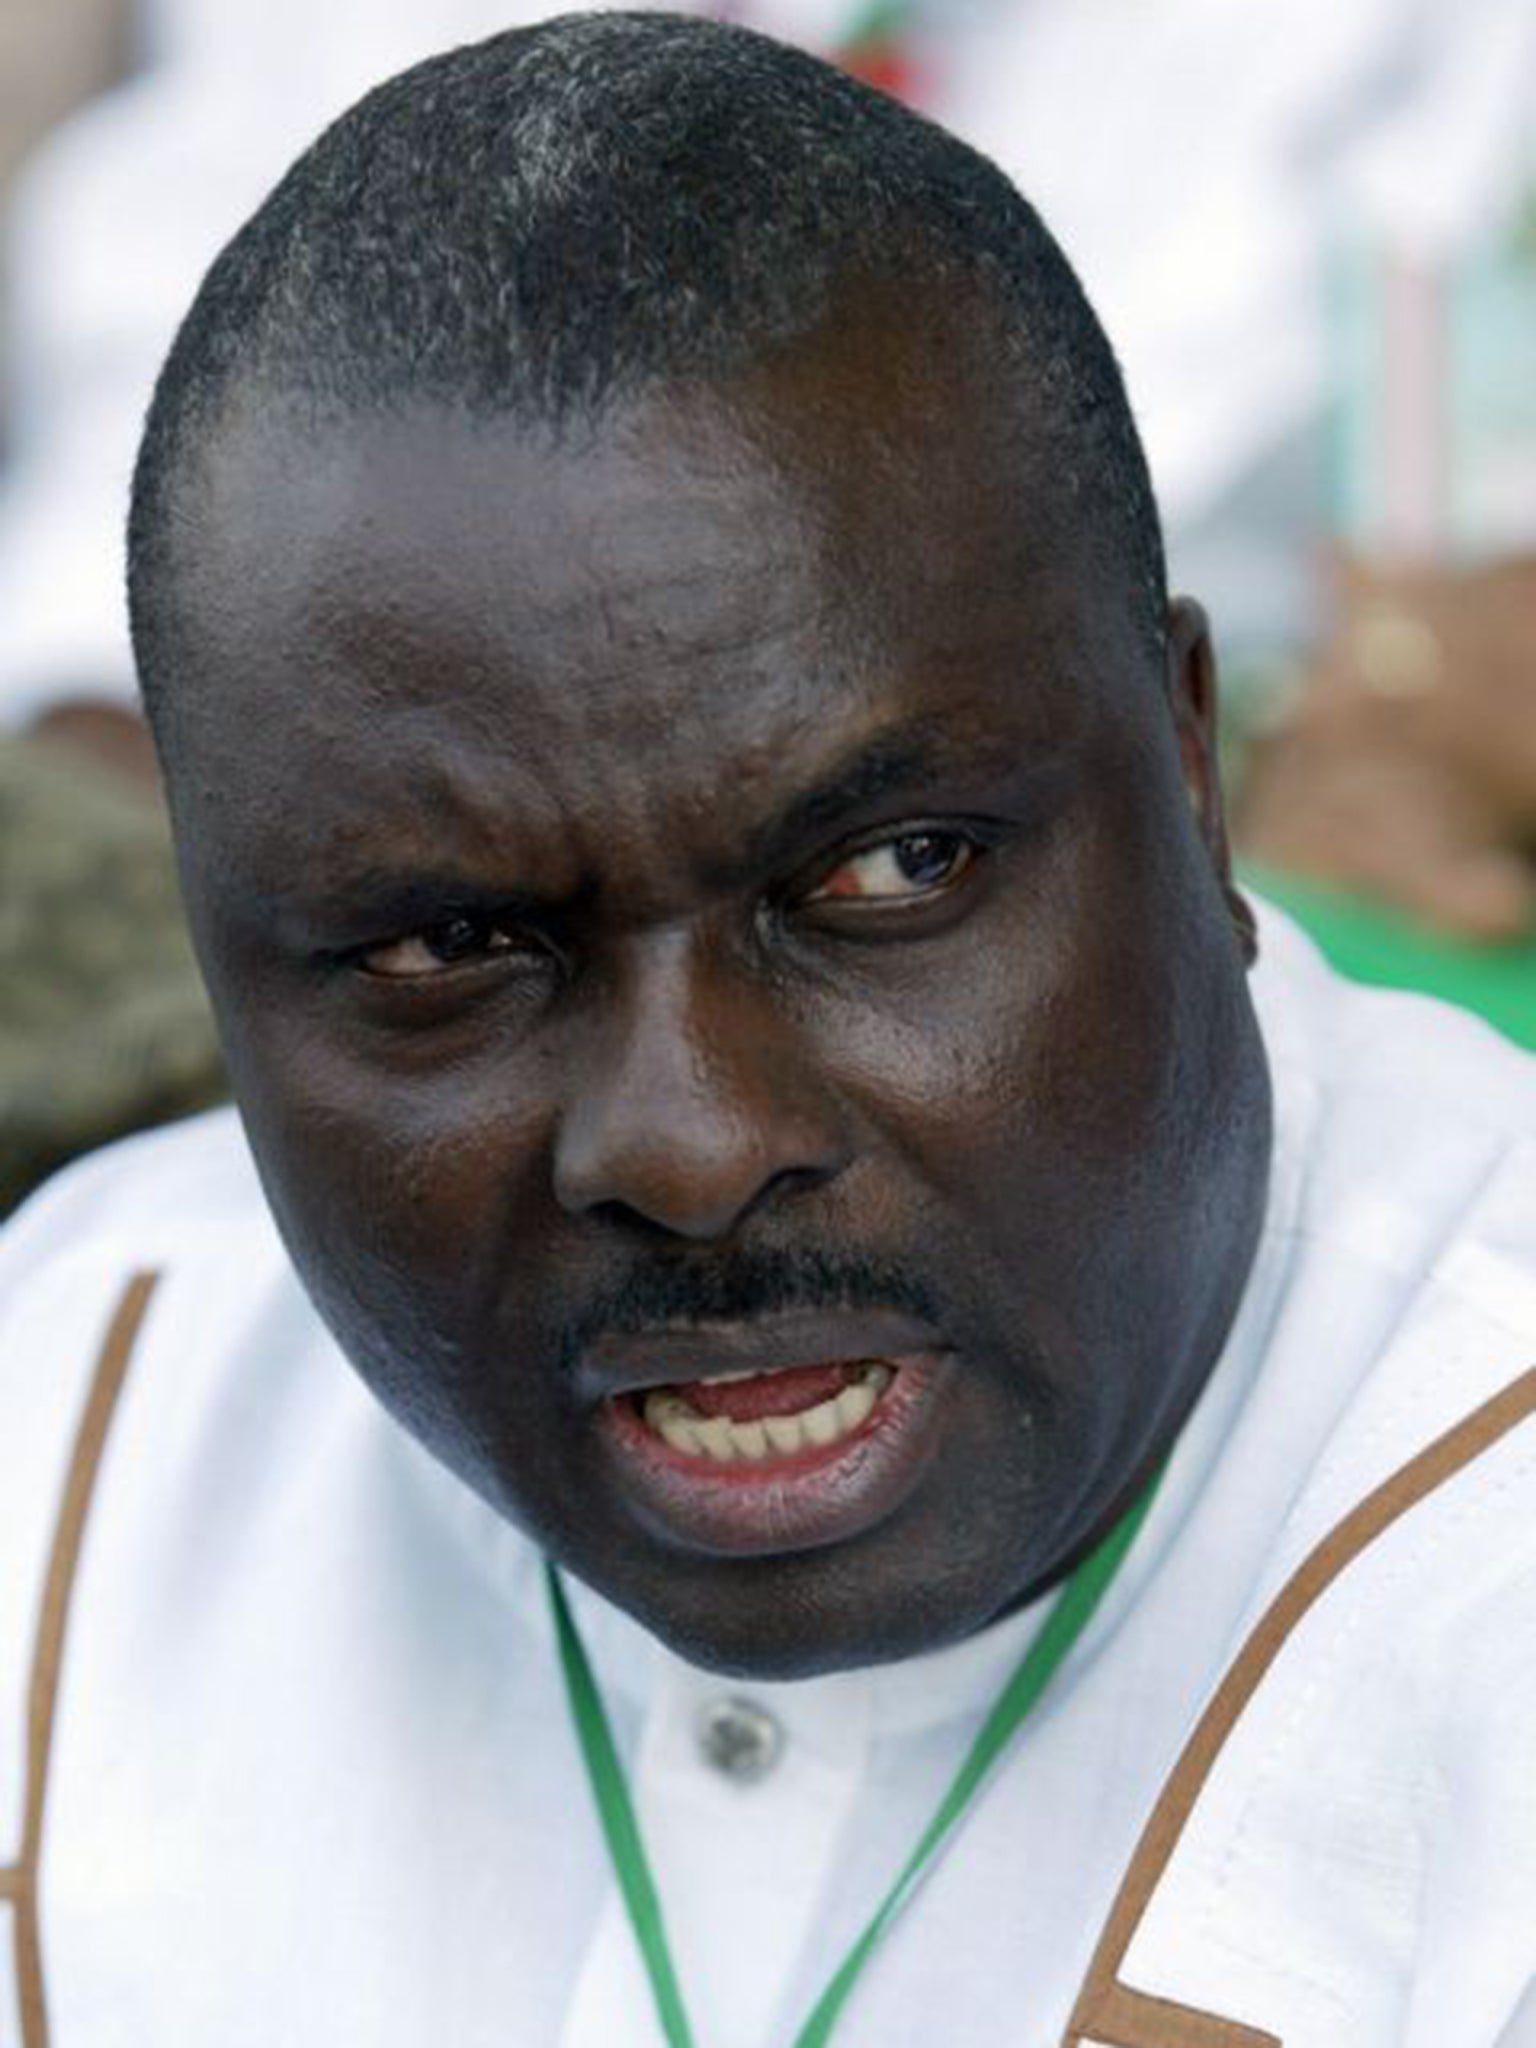 James Ibori stole money from the public purse in Nigeria to buy a £2.2m house in Hampstead, London